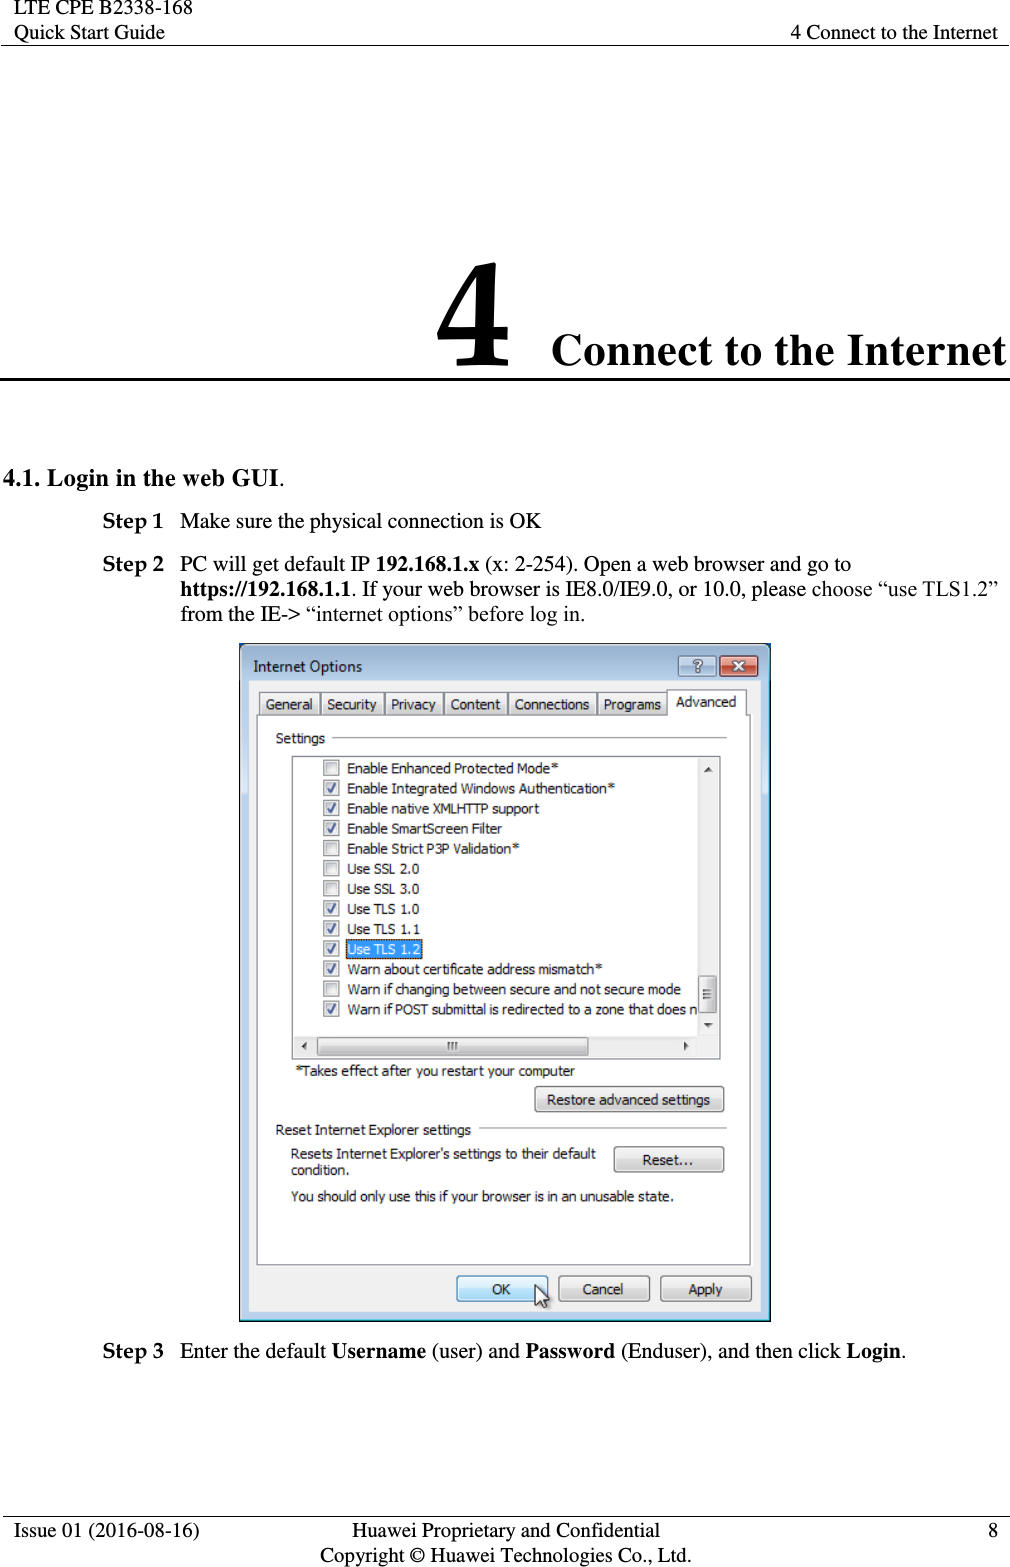 LTE CPE B2338-168 Quick Start Guide 4 Connect to the Internet  Issue 01 (2016-08-16) Huawei Proprietary and Confidential         Copyright © Huawei Technologies Co., Ltd. 8  4 Connect to the Internet 4.1. Login in the web GUI. Step 1 Make sure the physical connection is OK Step 2 PC will get default IP 192.168.1.x (x: 2-254). Open a web browser and go to https://192.168.1.1. If your web browser is IE8.0/IE9.0, or 10.0, please from the IE-&gt;   Step 3 Enter the default Username (user) and Password (Enduser), and then click Login. 